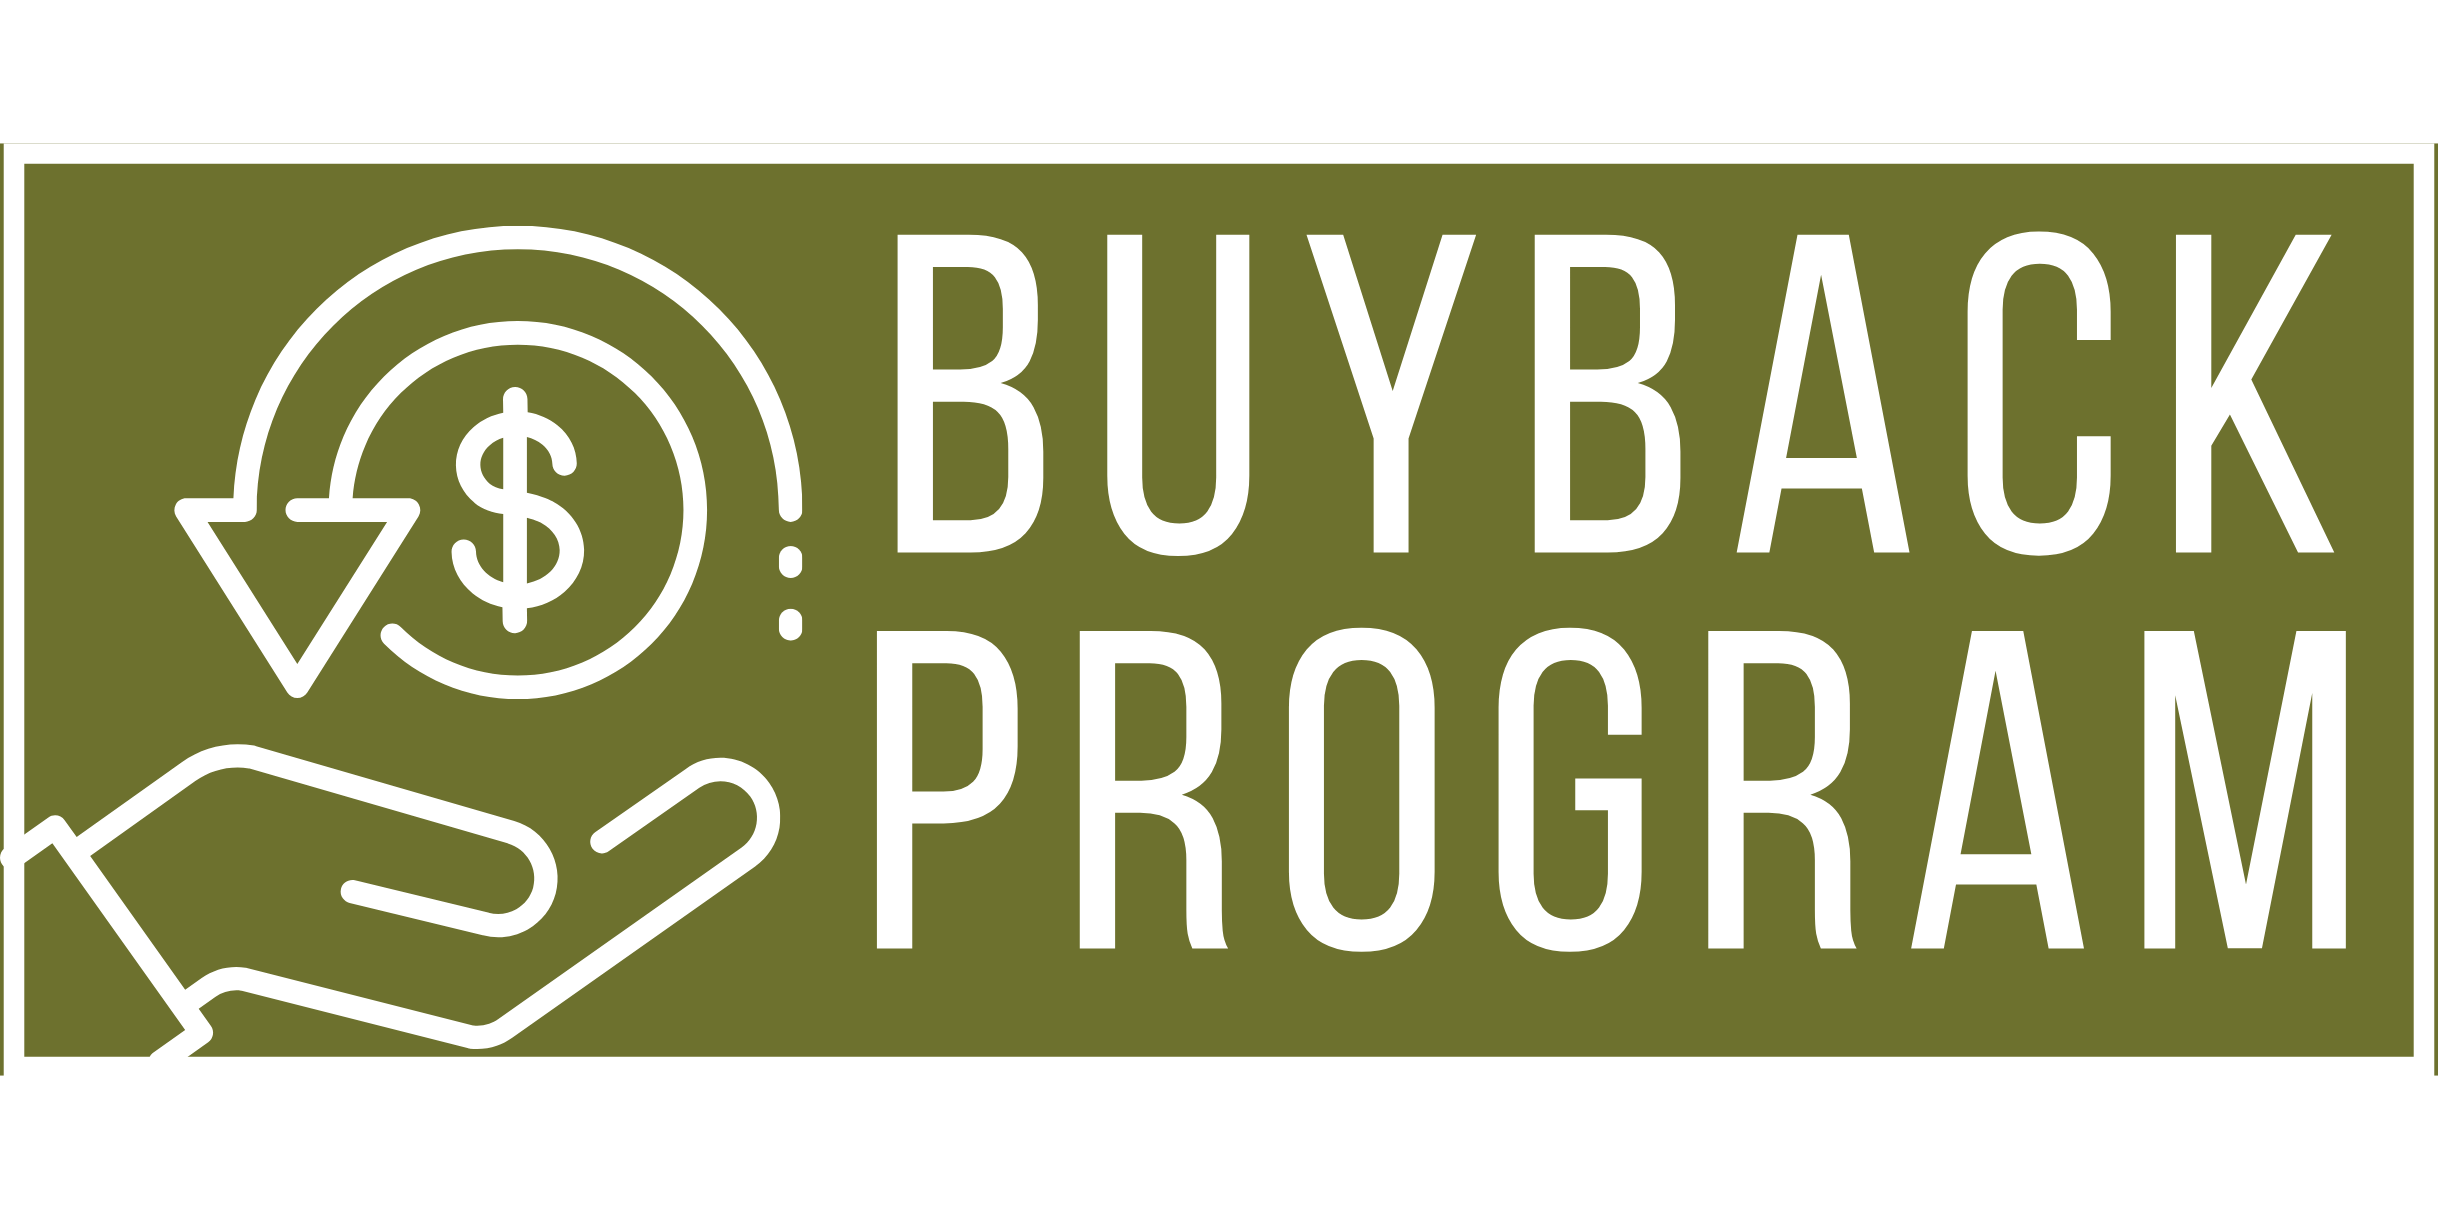 Harvard BuyBack Program for any who buy gold and silver from us